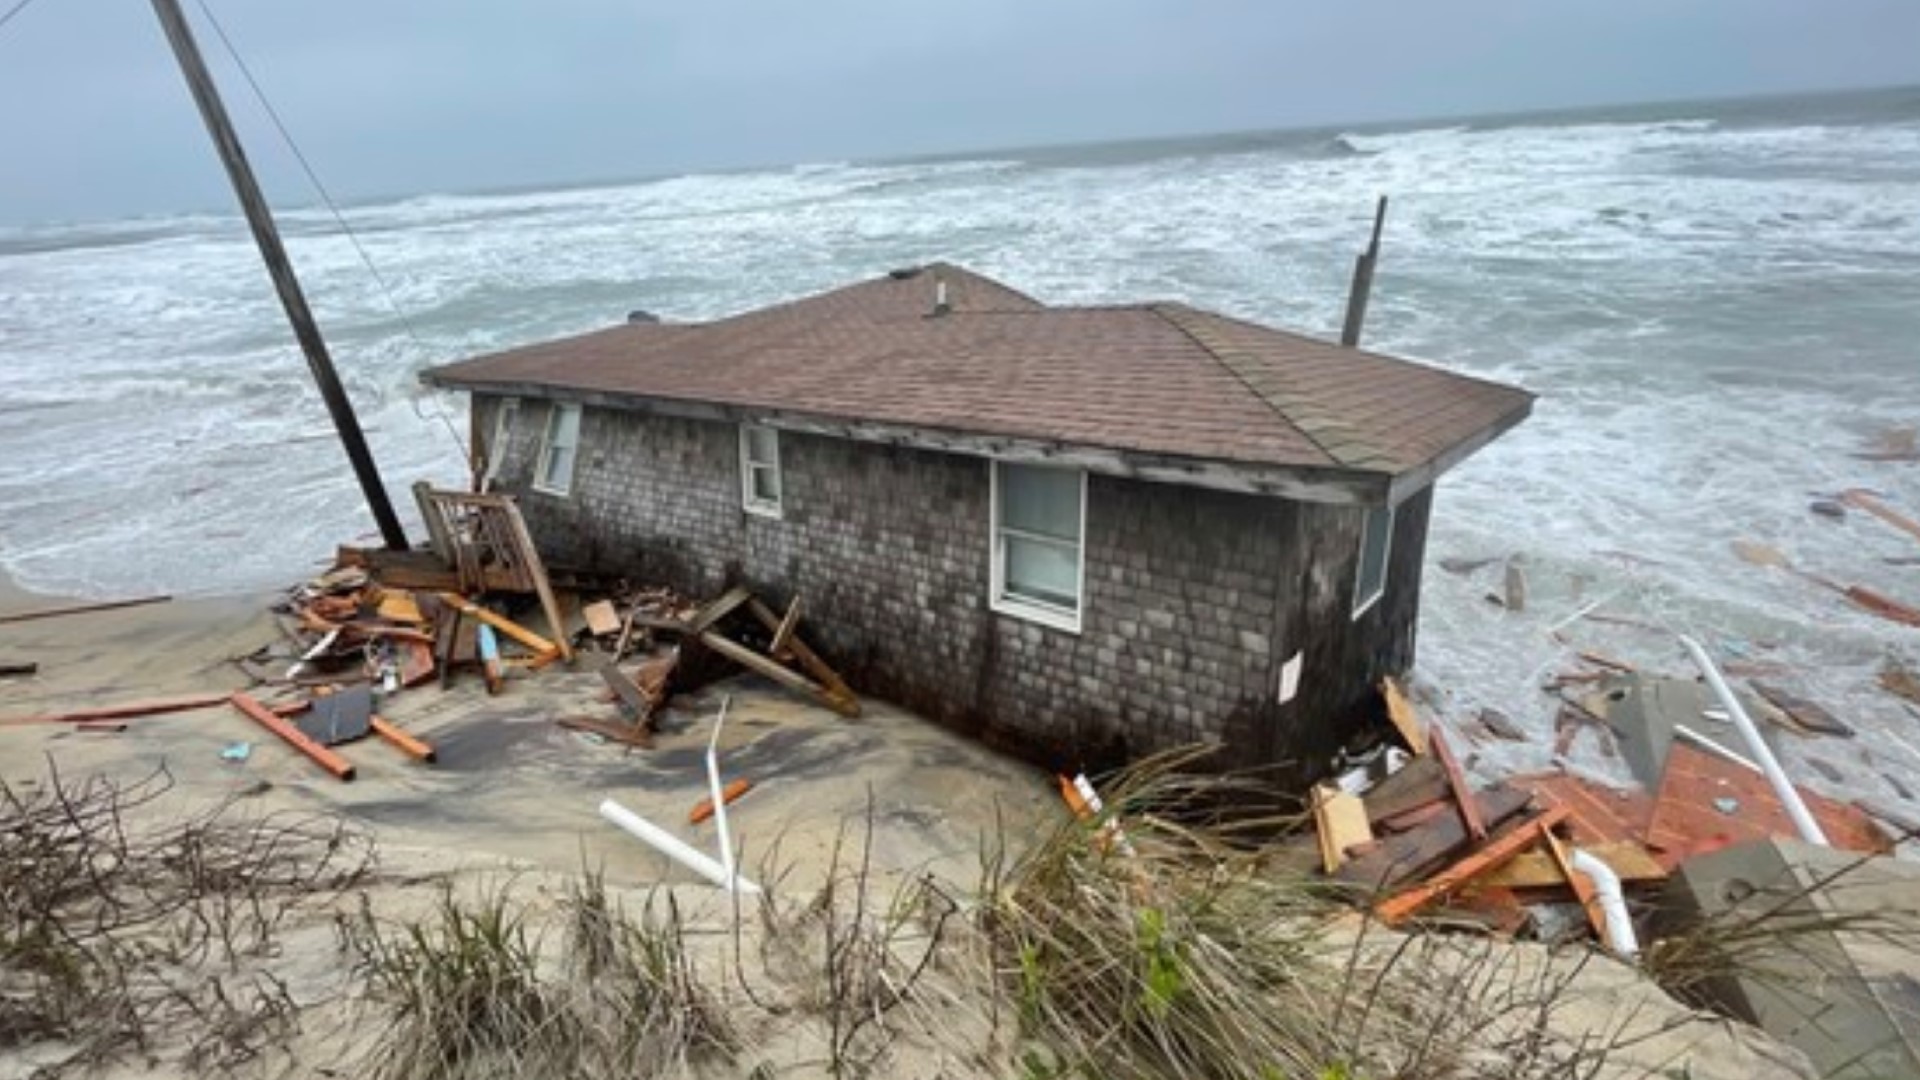 The one-story house was located on East Point Drive, which is close to the North Carolina Highway 12 roundabout that leads to the Jug Handle Bridge.